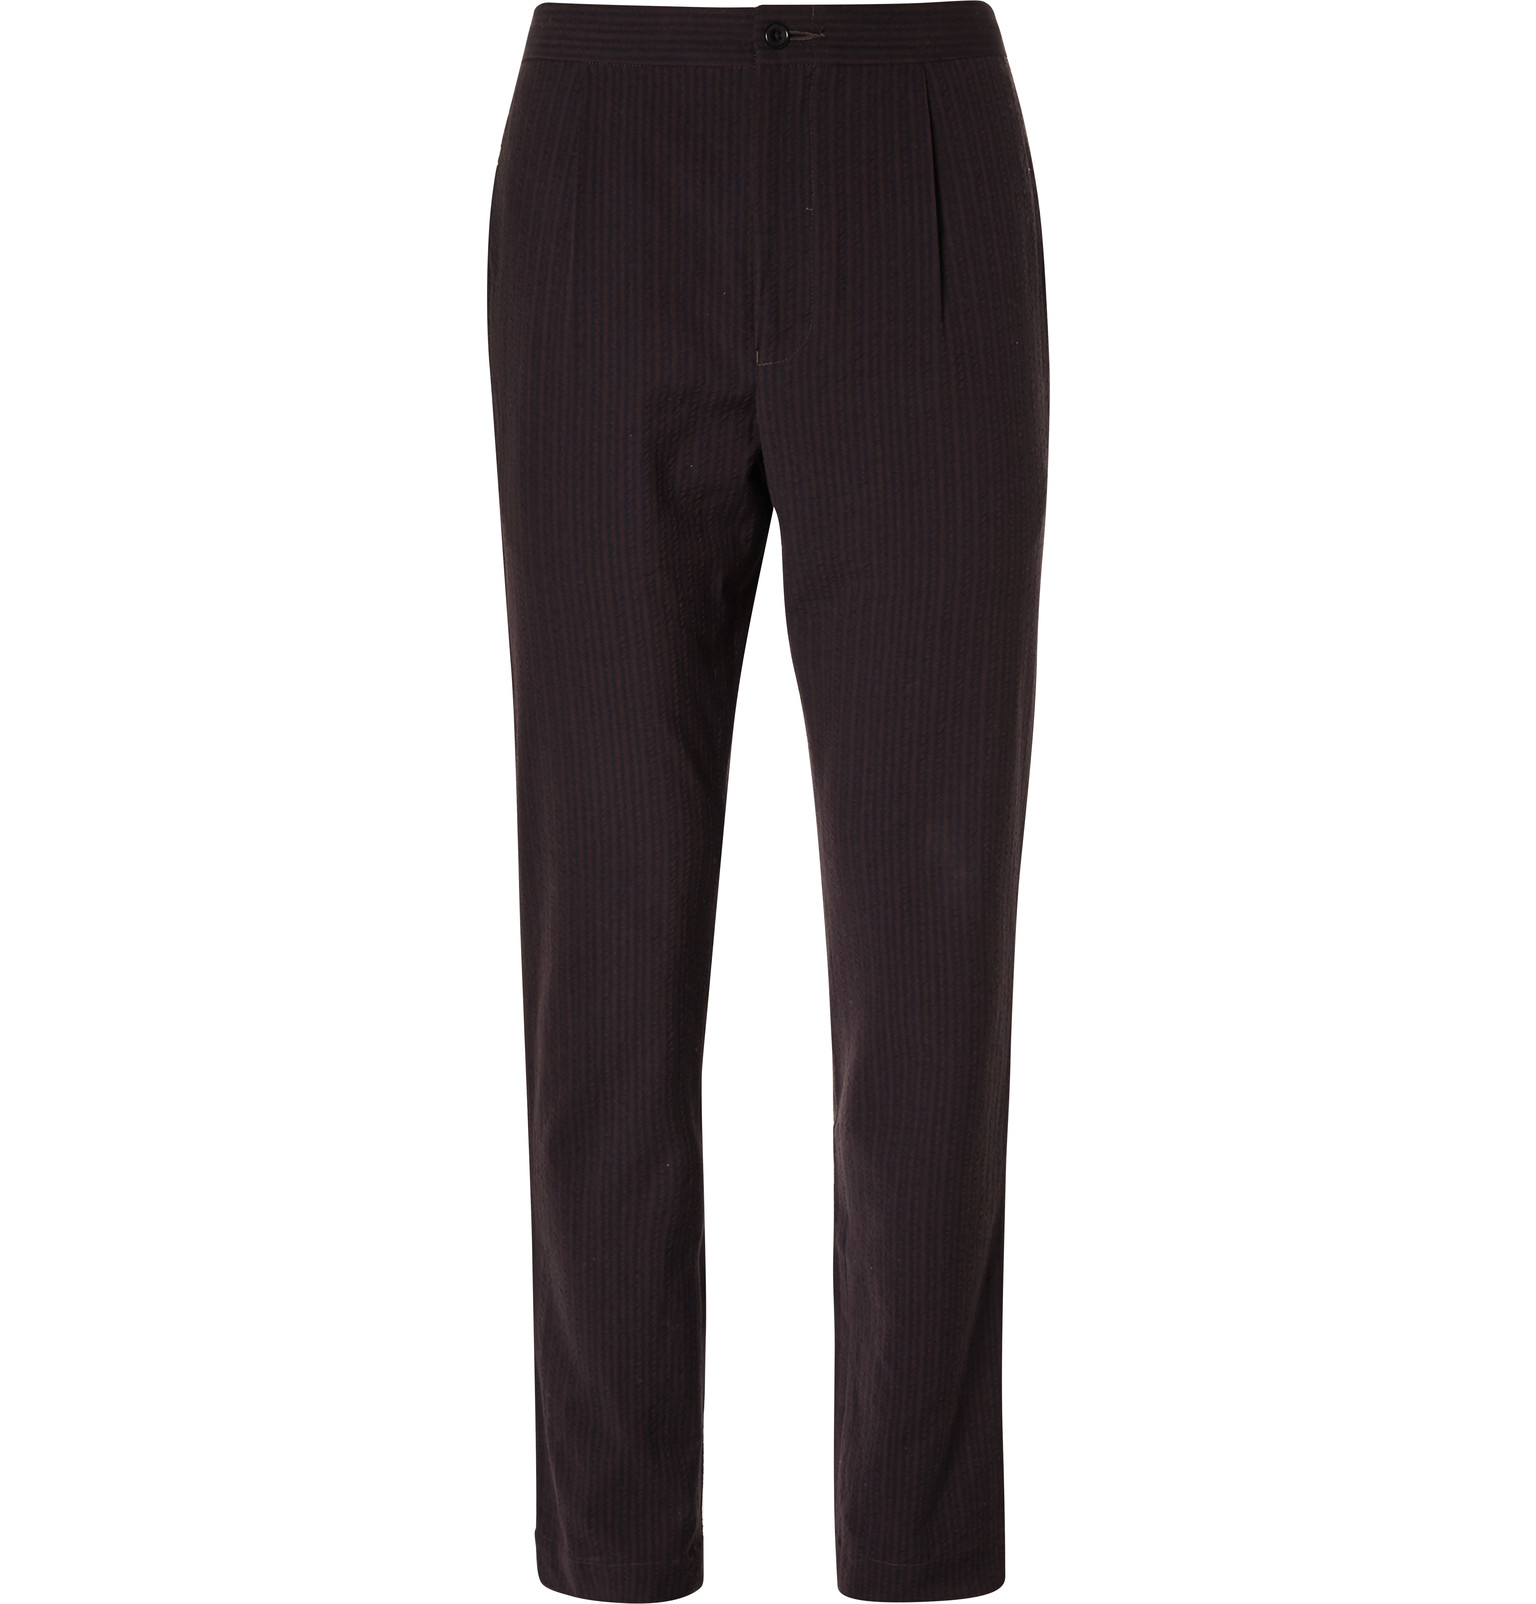 camoshita-navy-slim-fit-striped-wool-and-cotton-blend-seersucker-trousers-blue-product-5-398241905-normal.jpeg